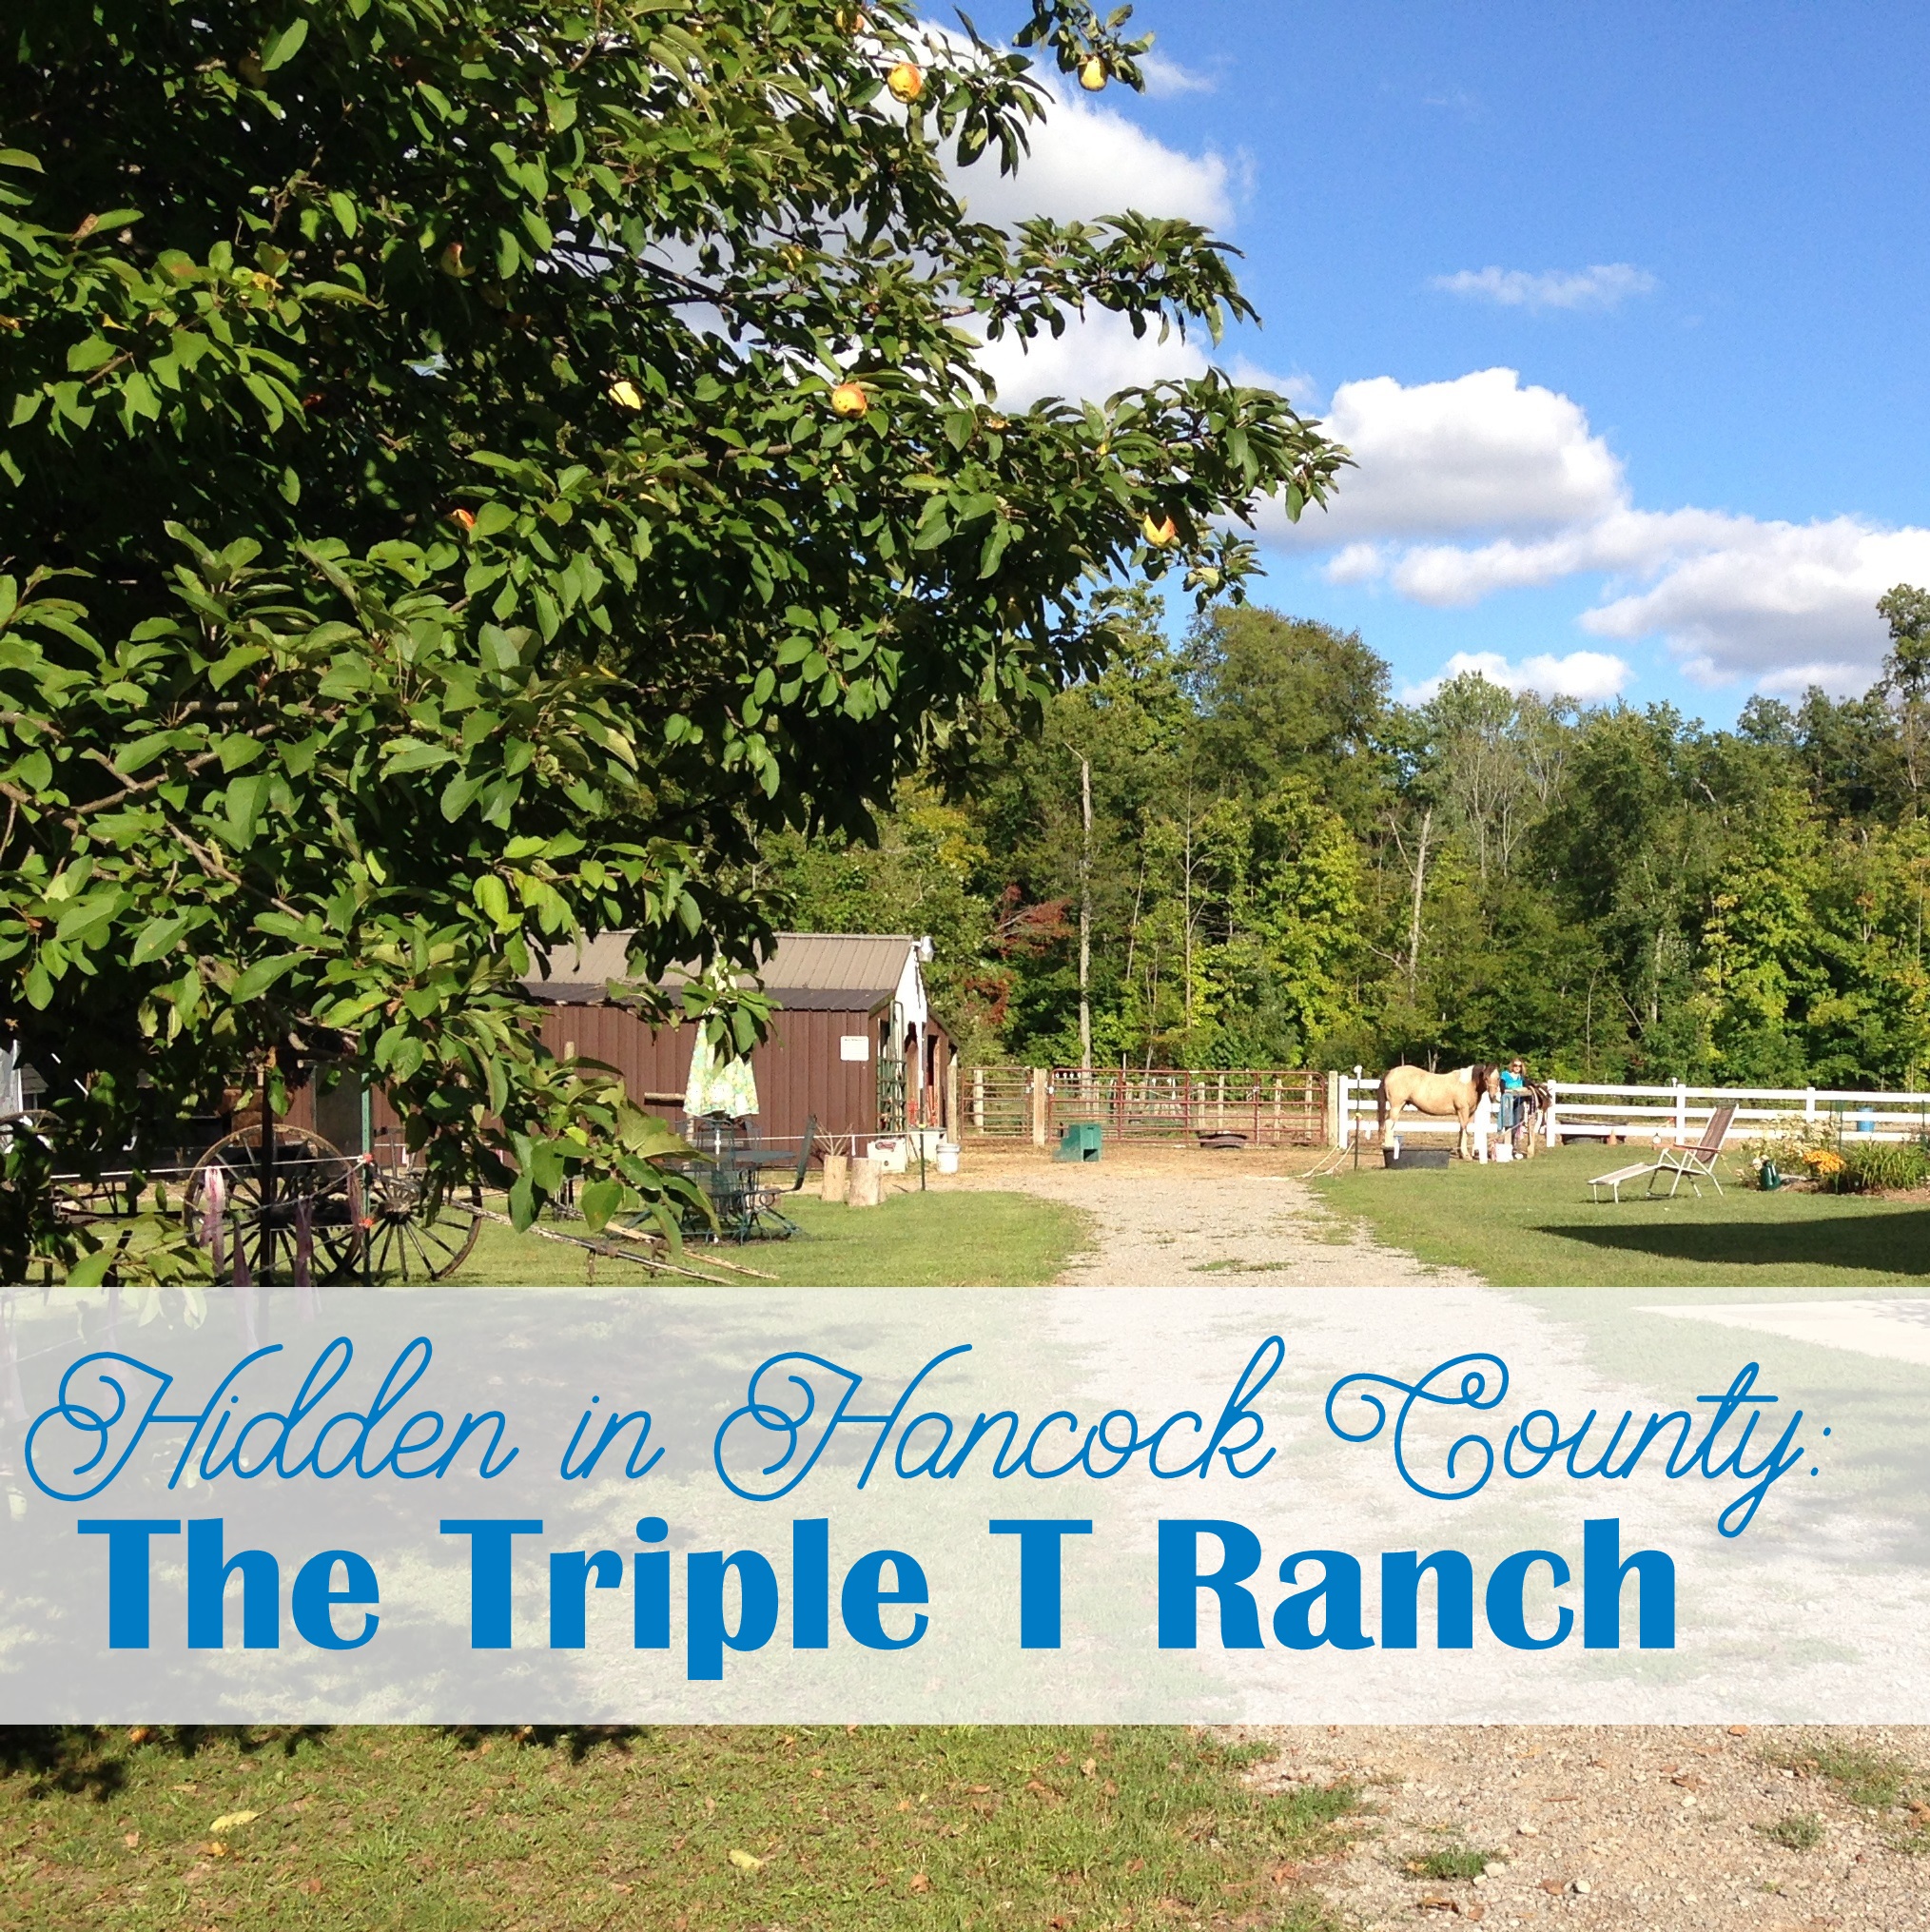 Hancock County is home to many hidden gems, don't miss this one! Triple T Ranch is a great place for horseback riding, your child's birthday party, and a day of fun! • VisitFindlay.com